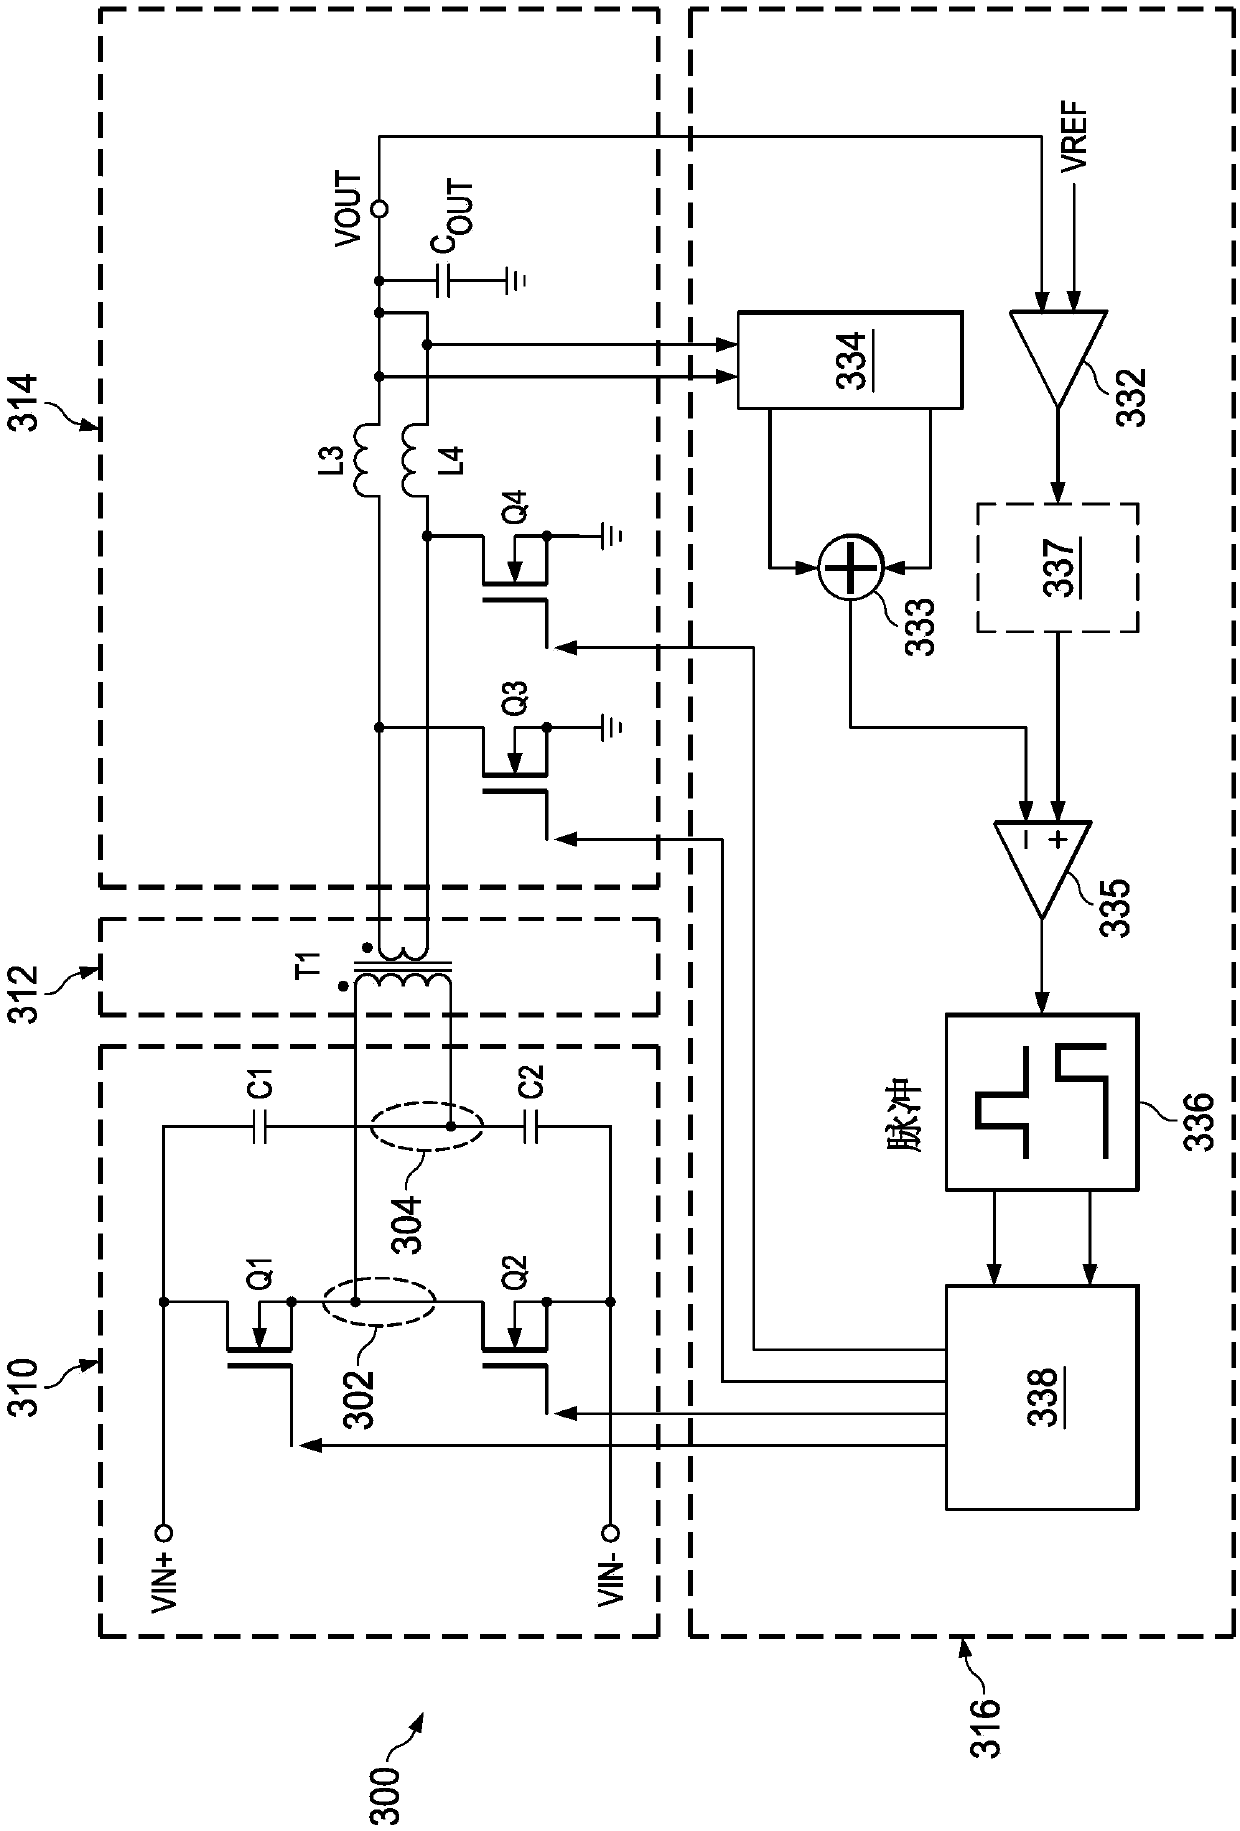 Hysteretic control for transformer based power converters